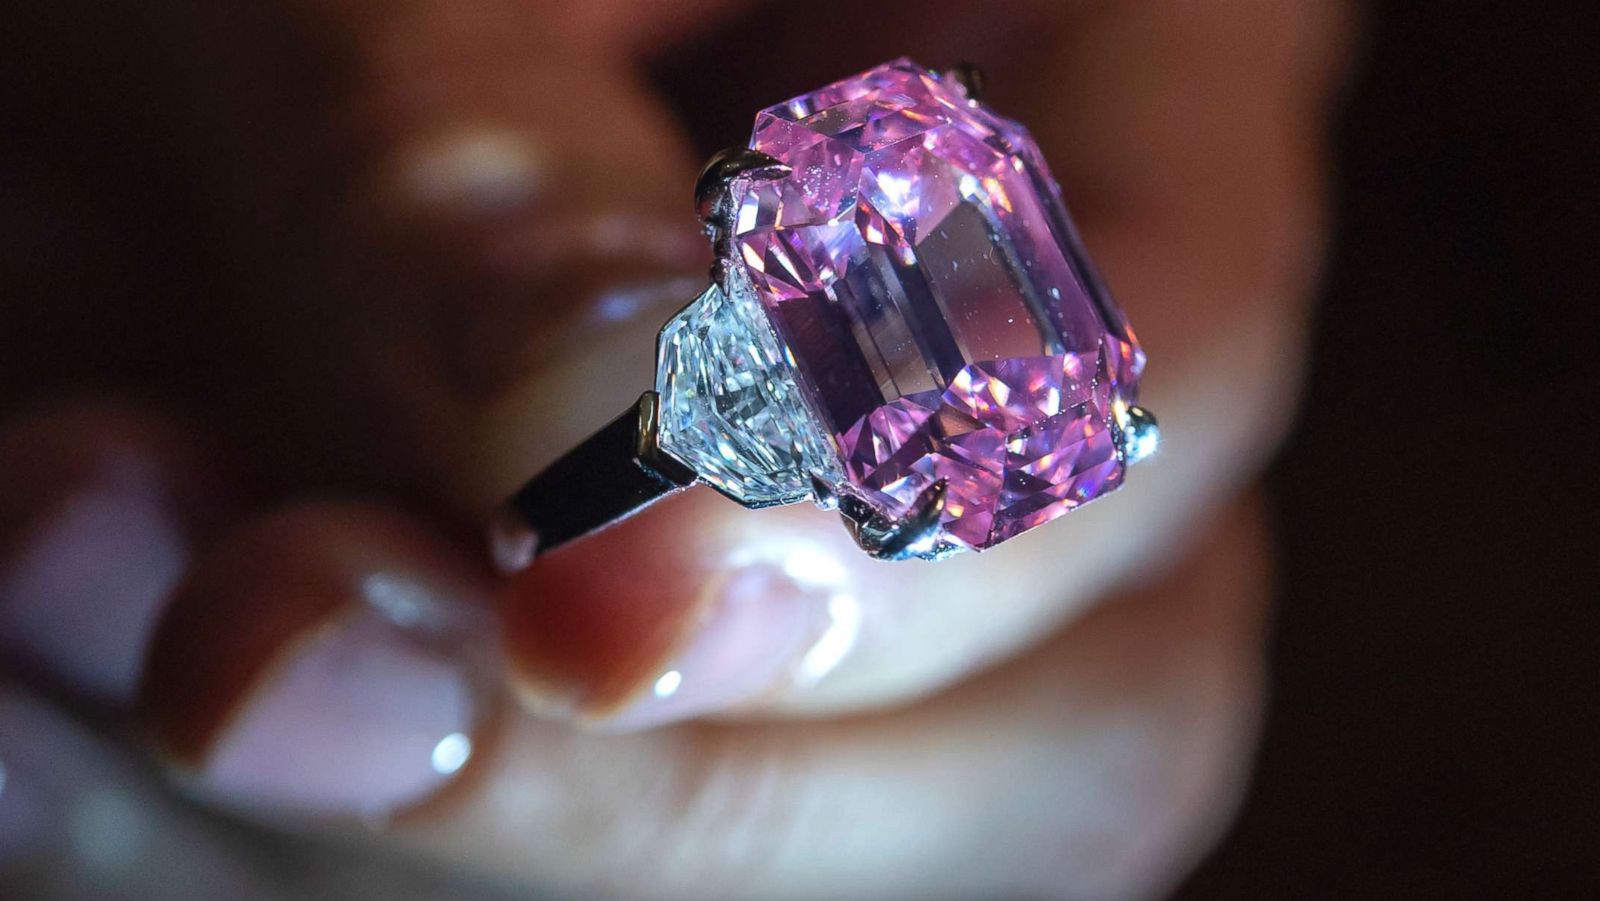 10 Most Expensive Rings Ever Made